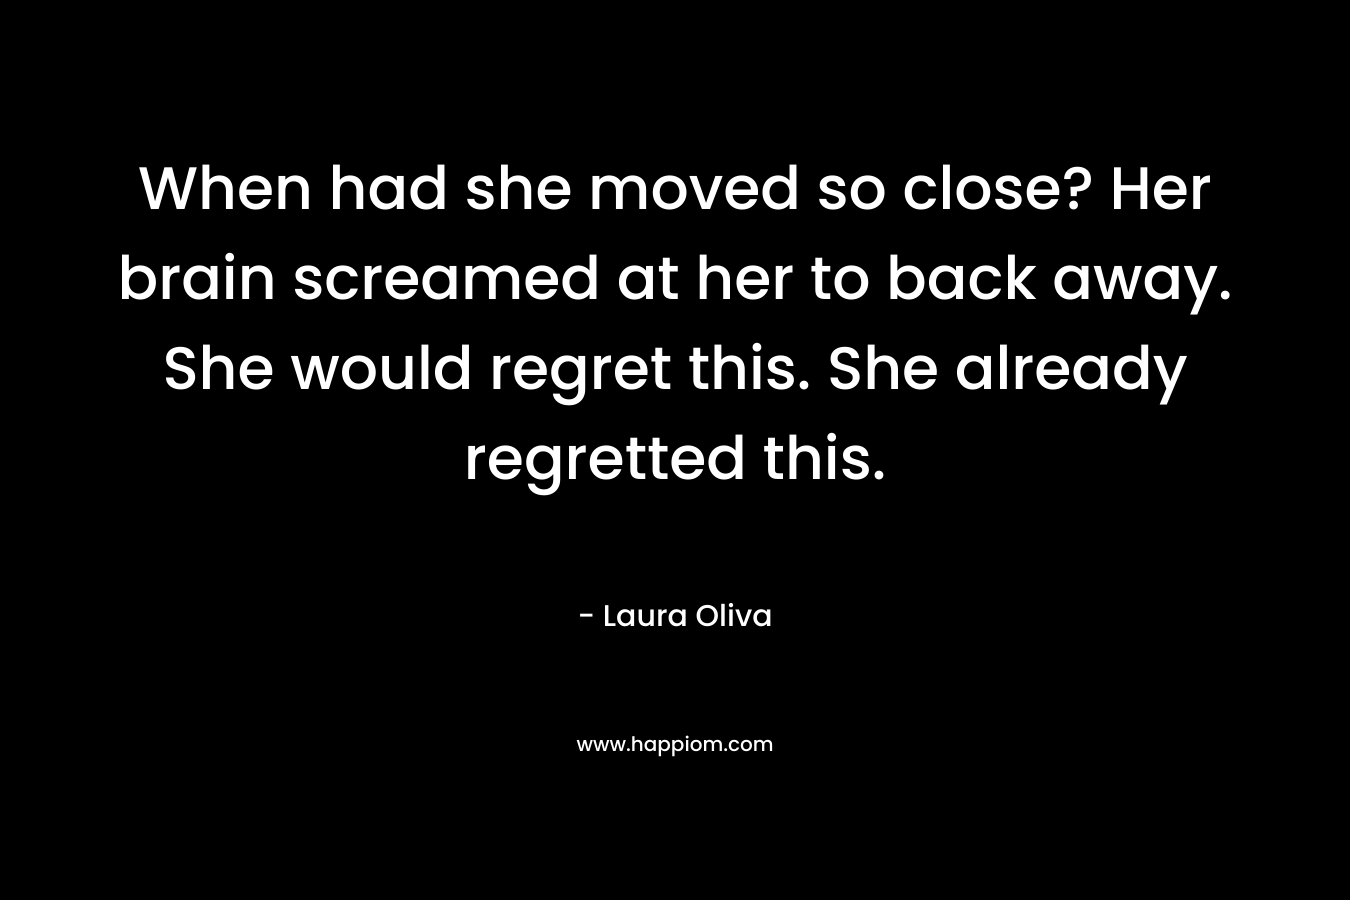 When had she moved so close? Her brain screamed at her to back away. She would regret this. She already regretted this. – Laura  Oliva